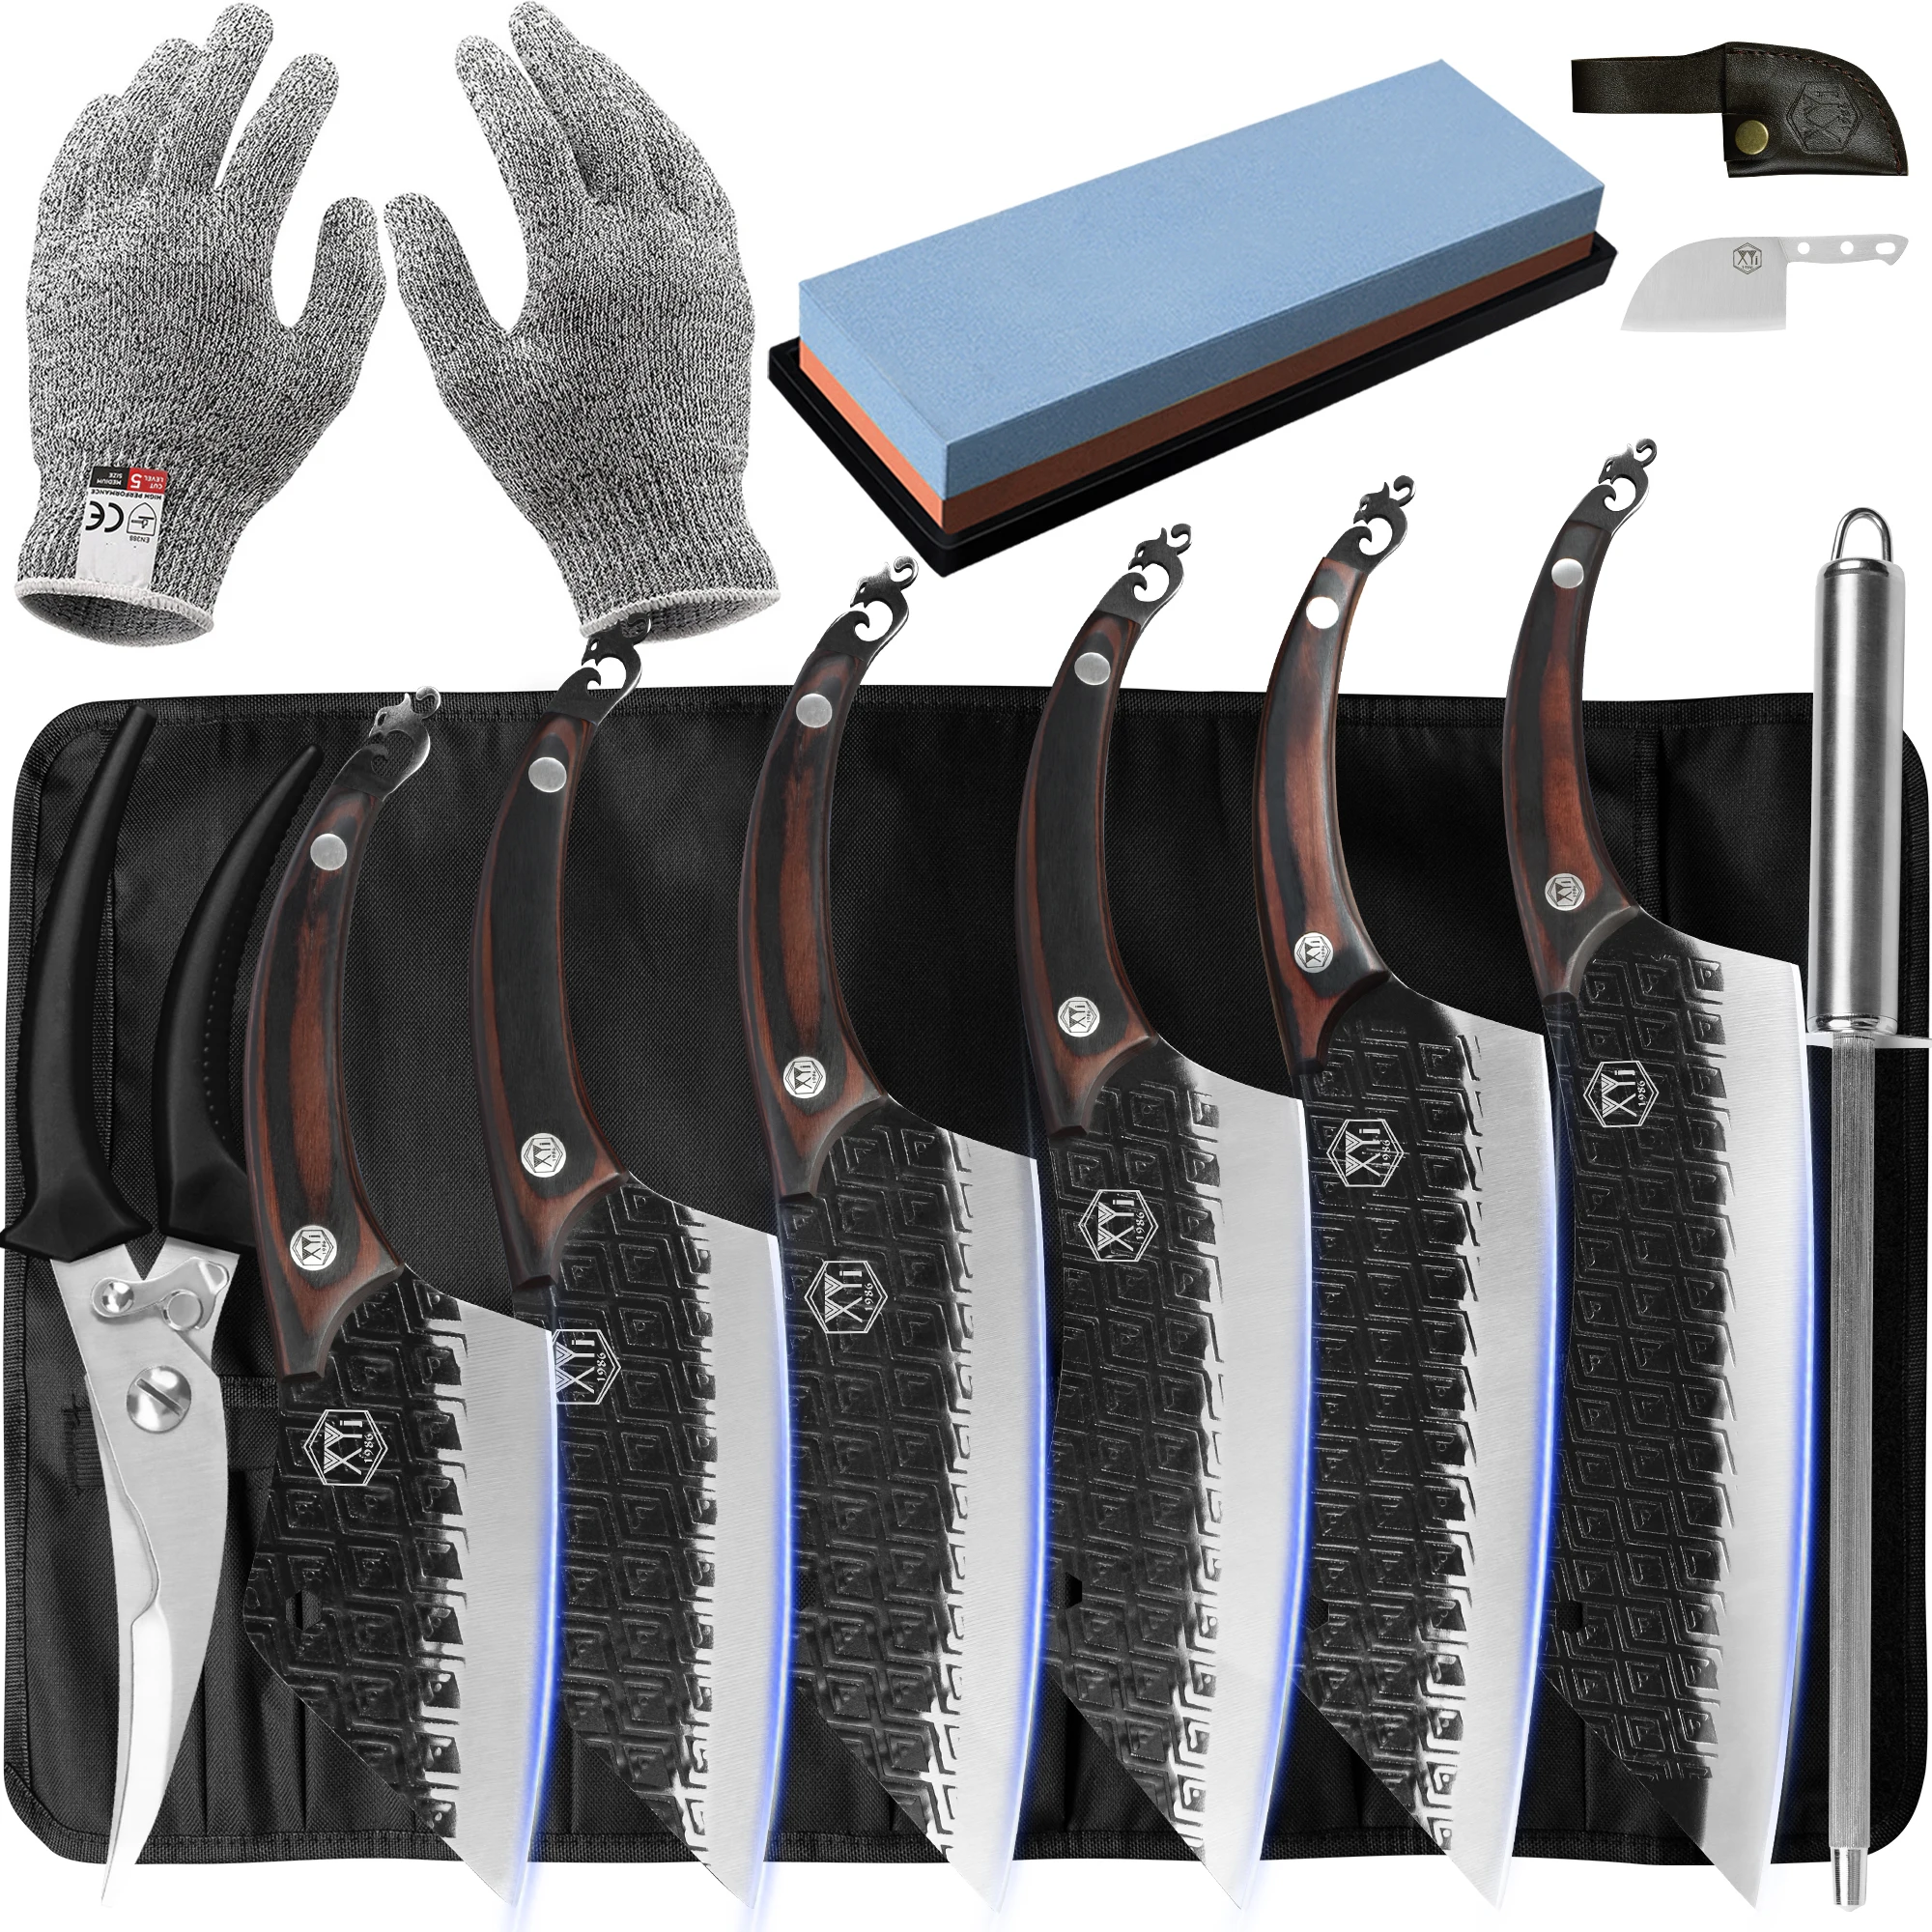 

Xyj 6 Pieces Chef Knife Set Stainless Steel Kitchen Knives with Bag Whetstone Scissors Anti-Cut Gloves Honing Steel Mini Blade